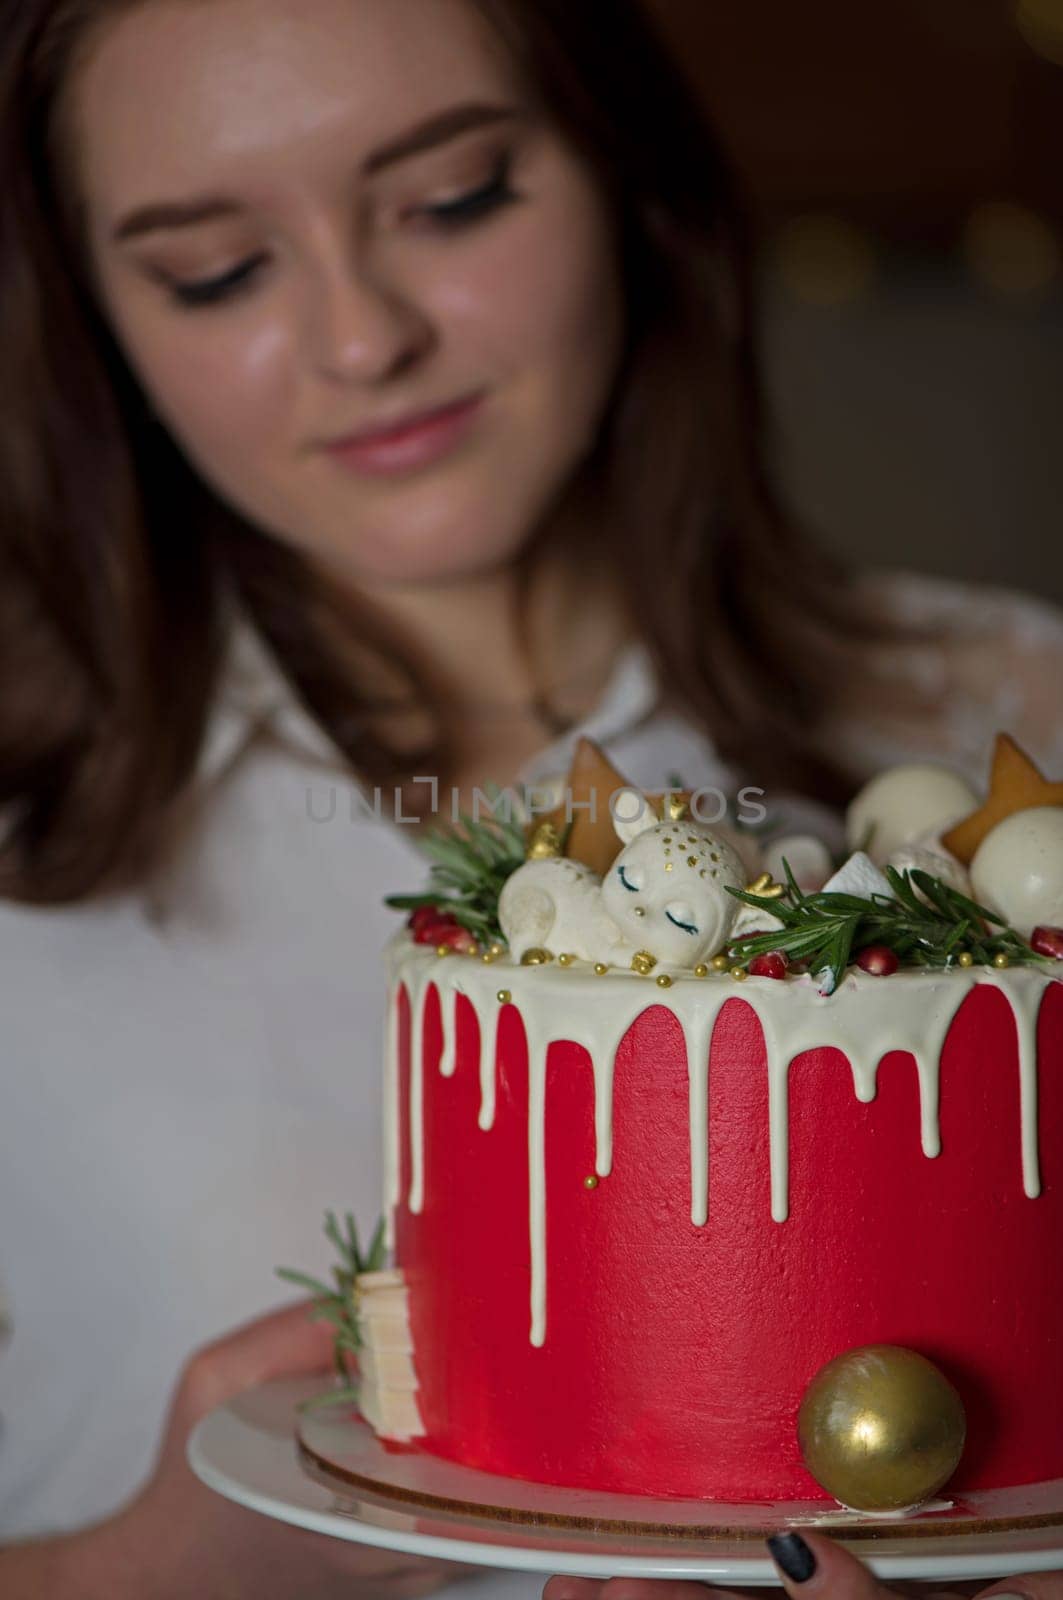 Young blonde girl in her kitchen holding a Christmas cake enjoying the smell